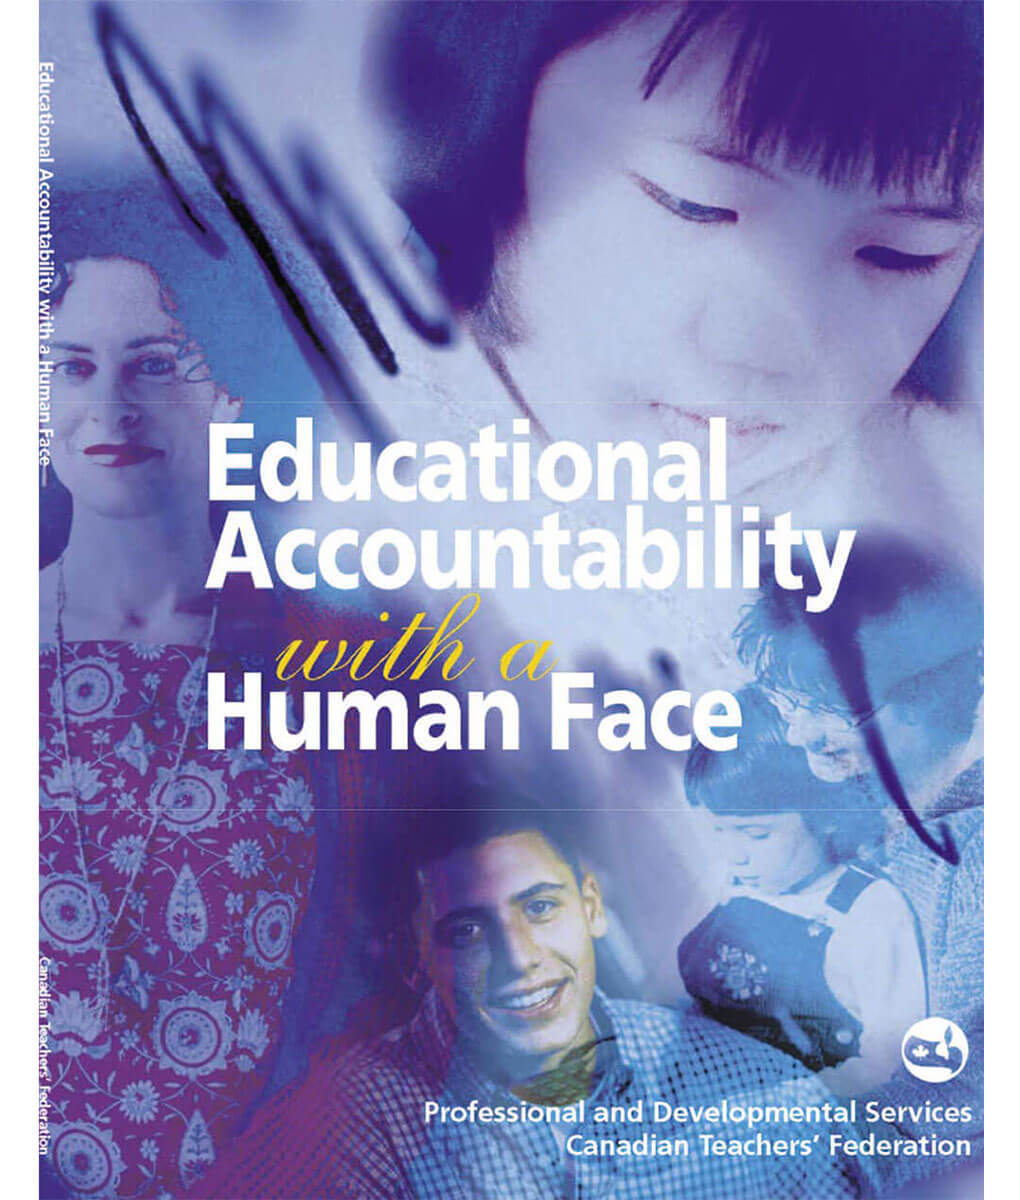 Educational Accountability with a Human Face